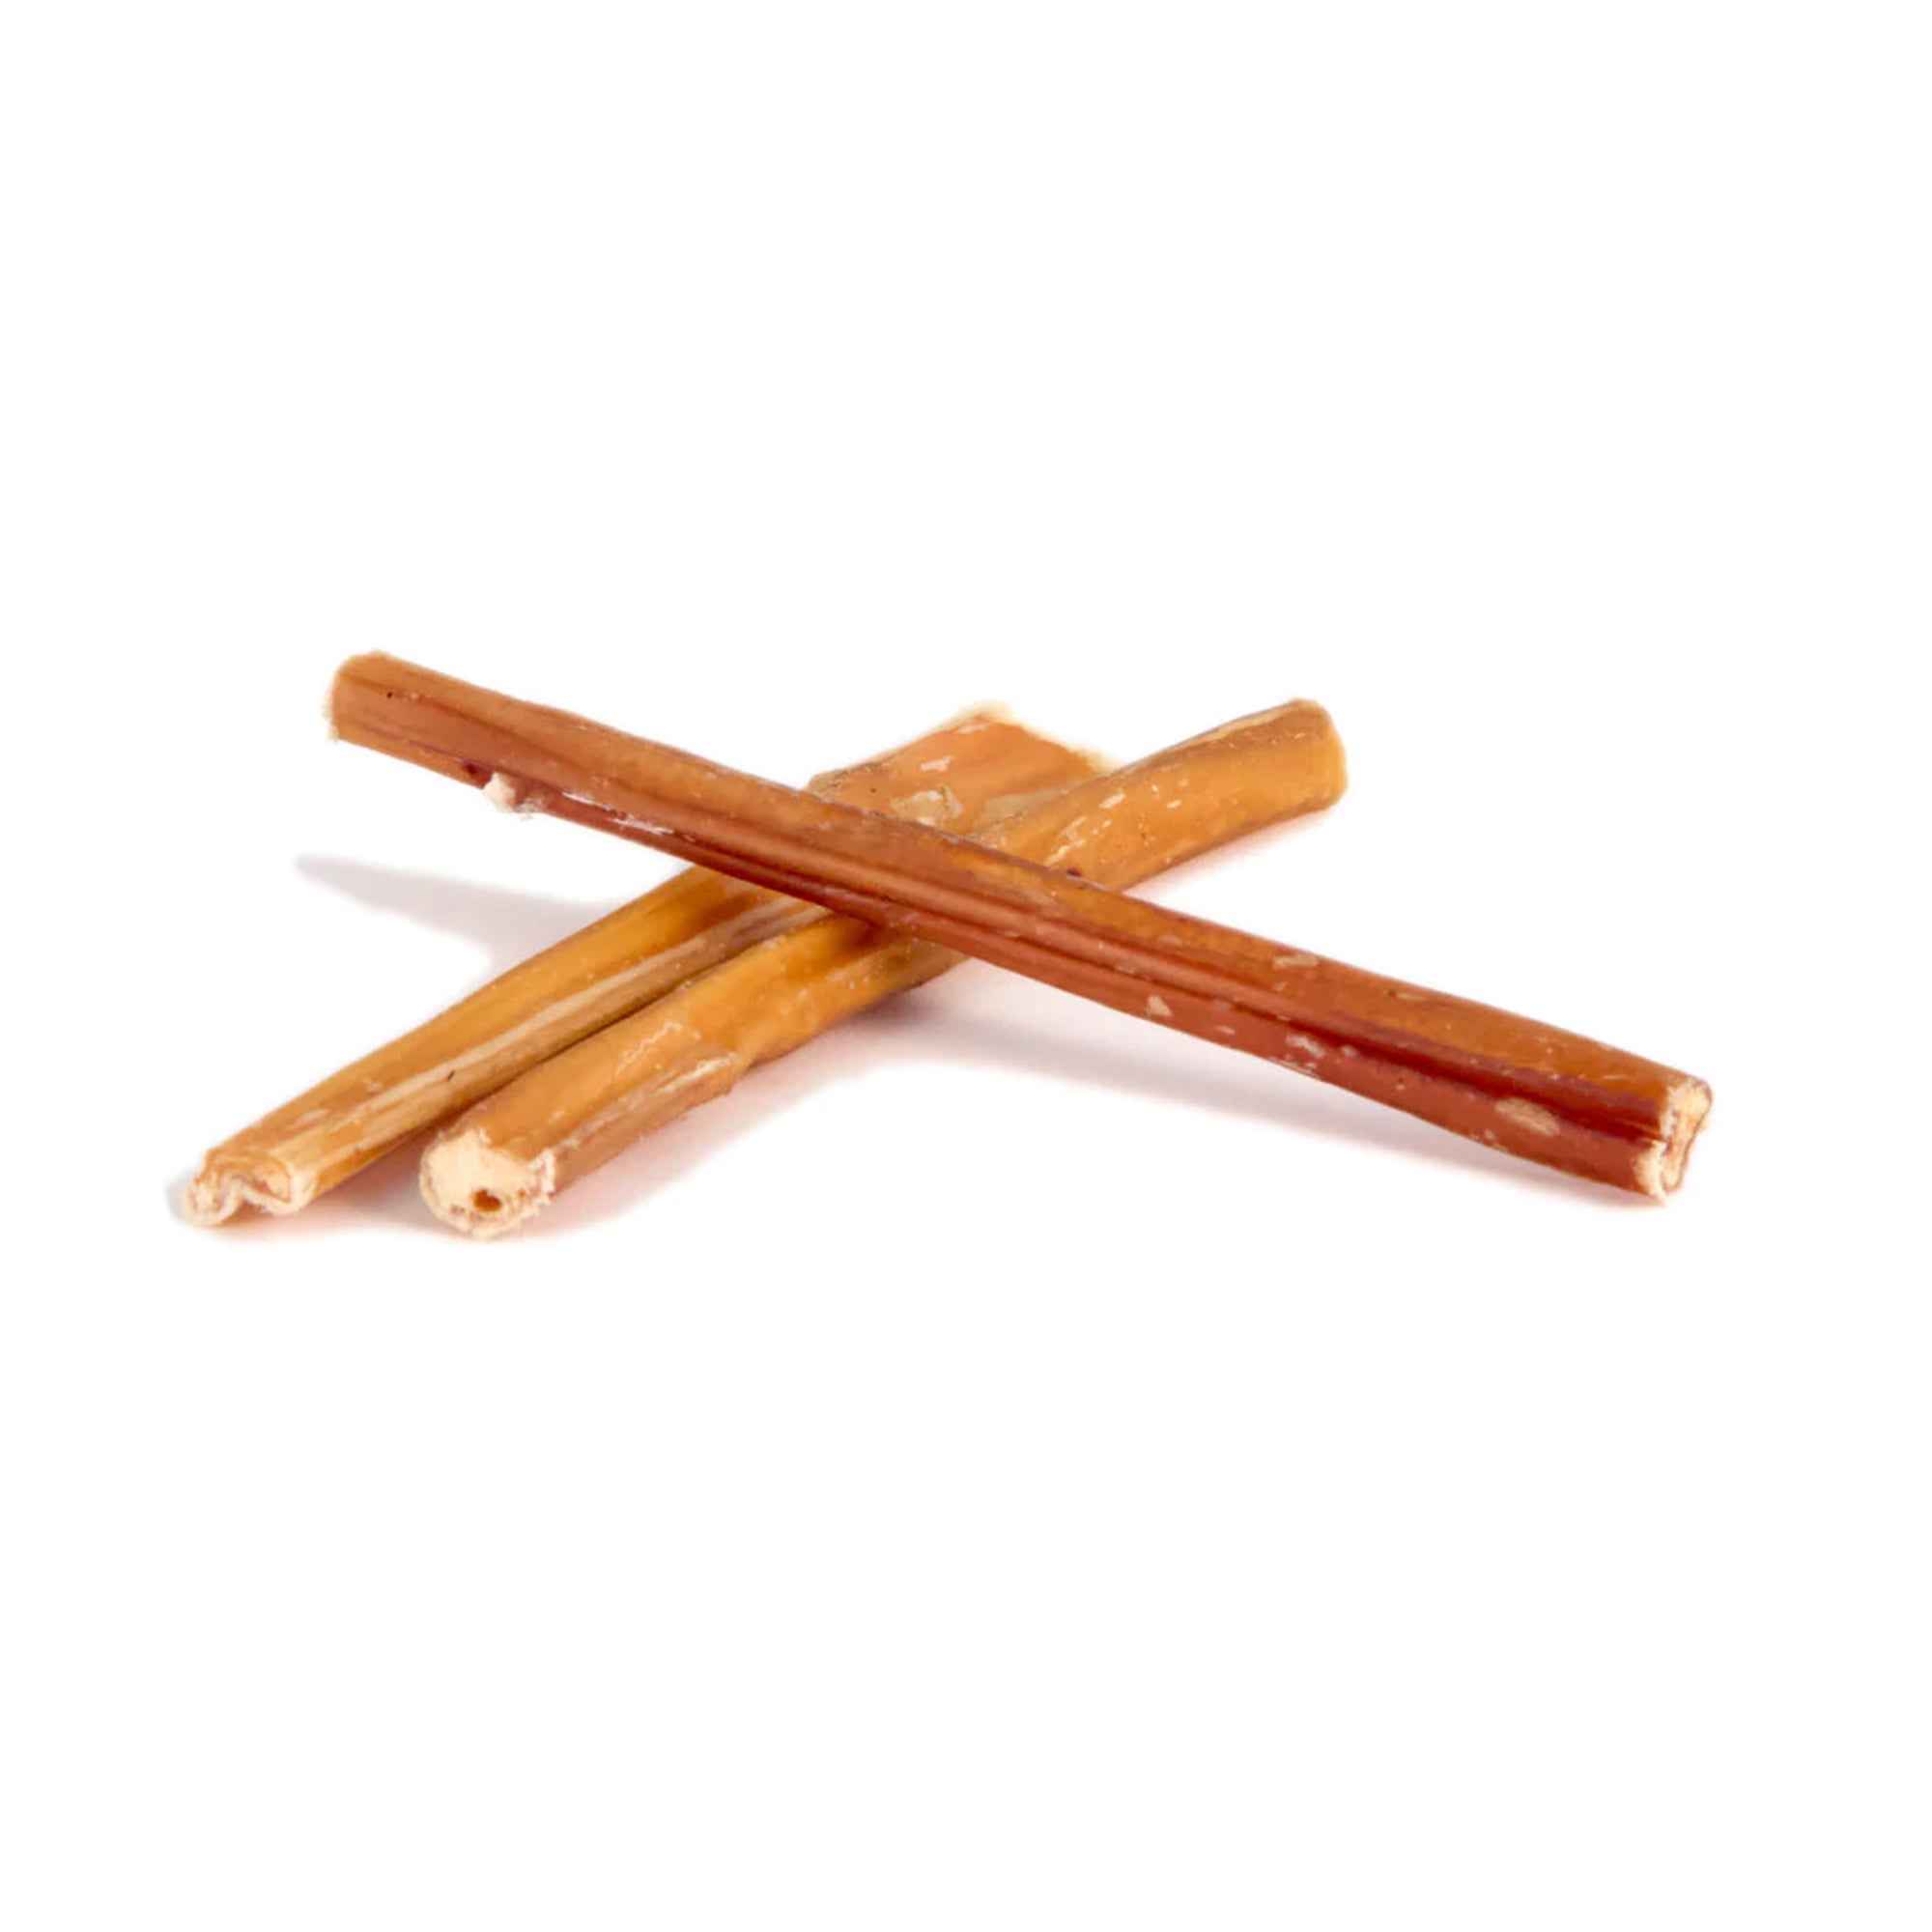 6" Standard Bully Sticks - 6 and 12 Count